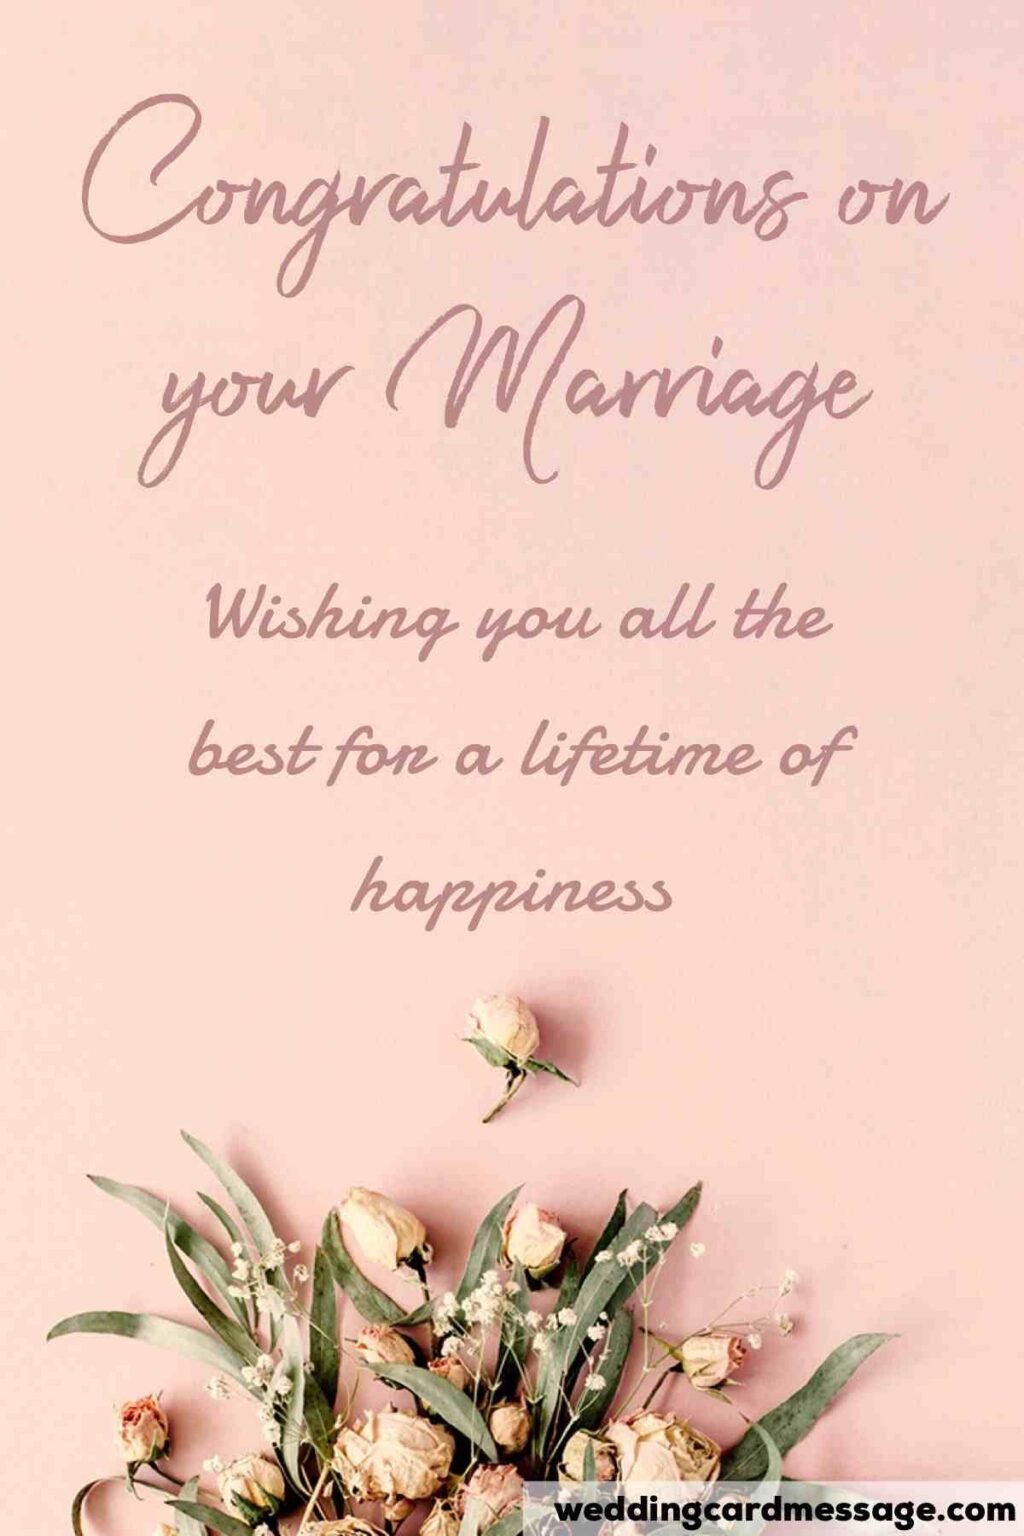 49 Wedding Messages from Parents - Wedding Card Message